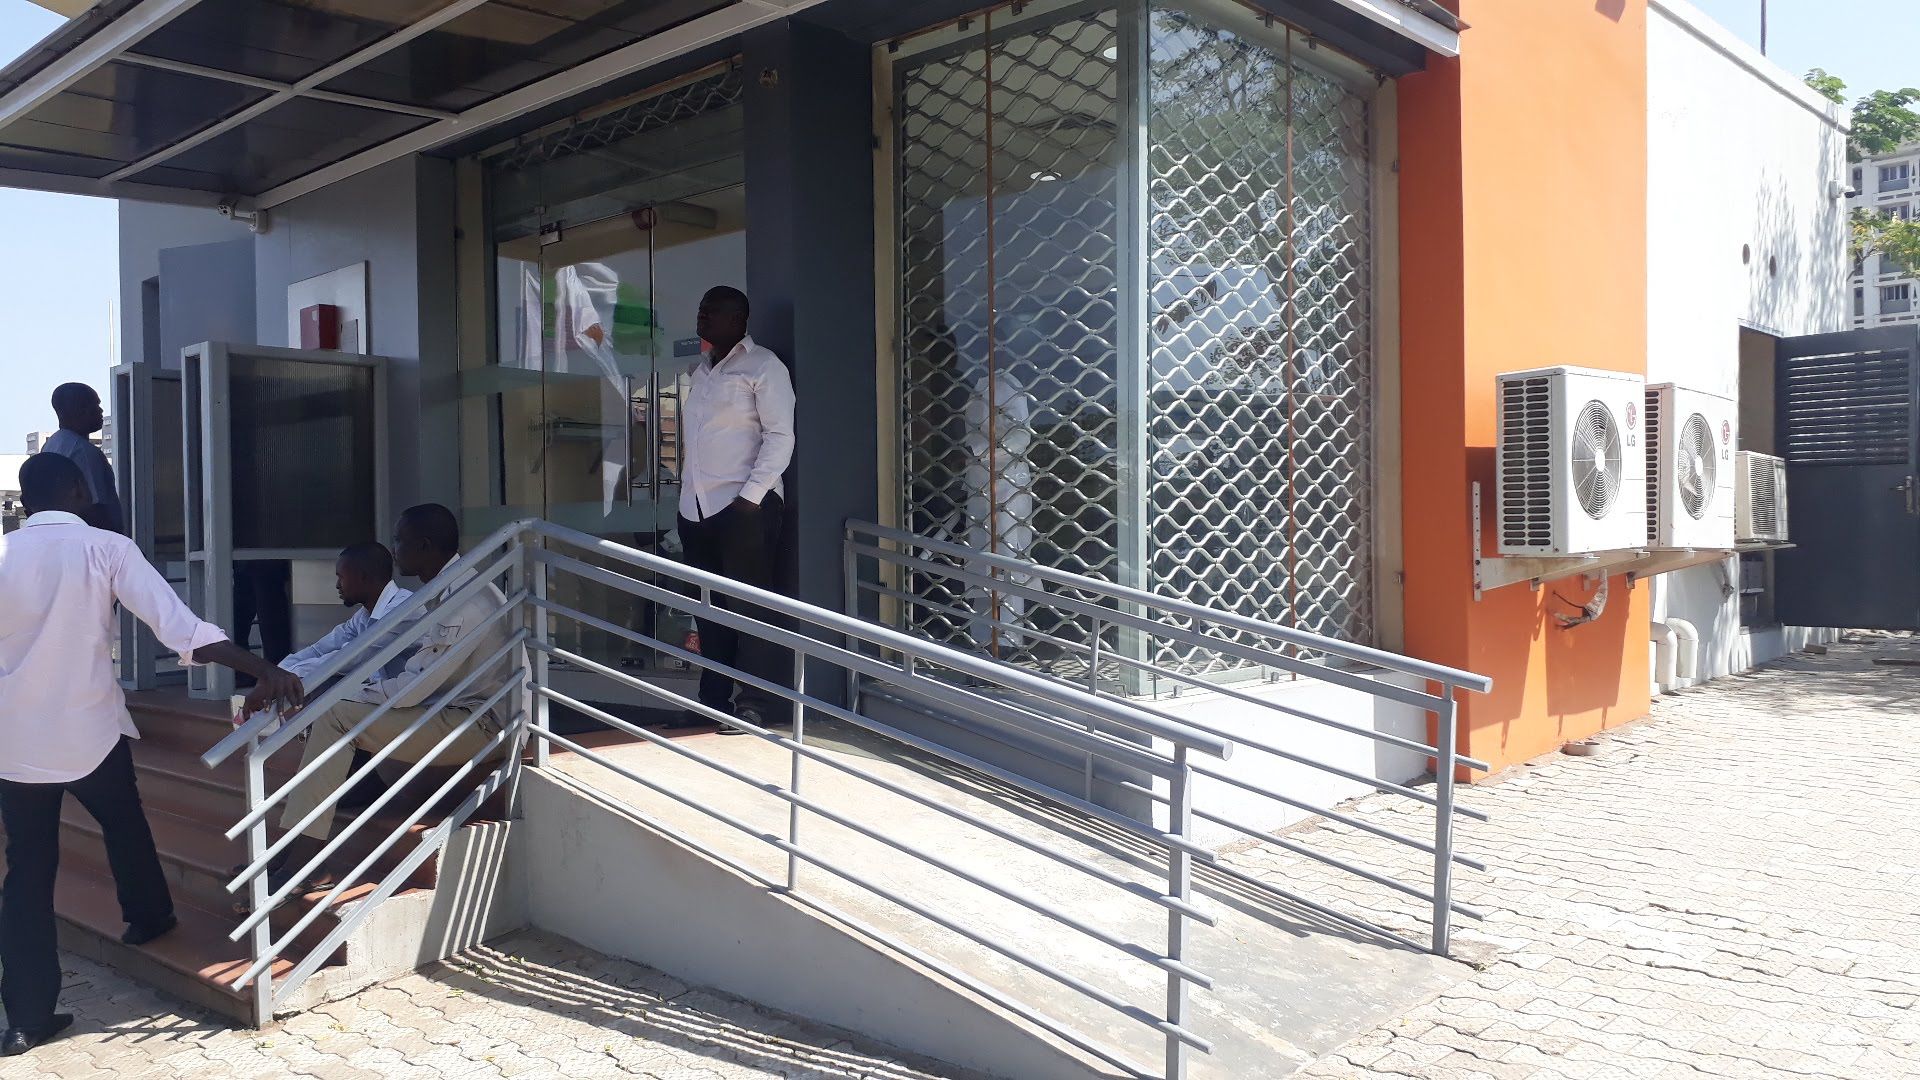 A picture of the GT bank ATM  which has a ramp but adds a step to get to the main ATM hall and a partition to the ATM outside